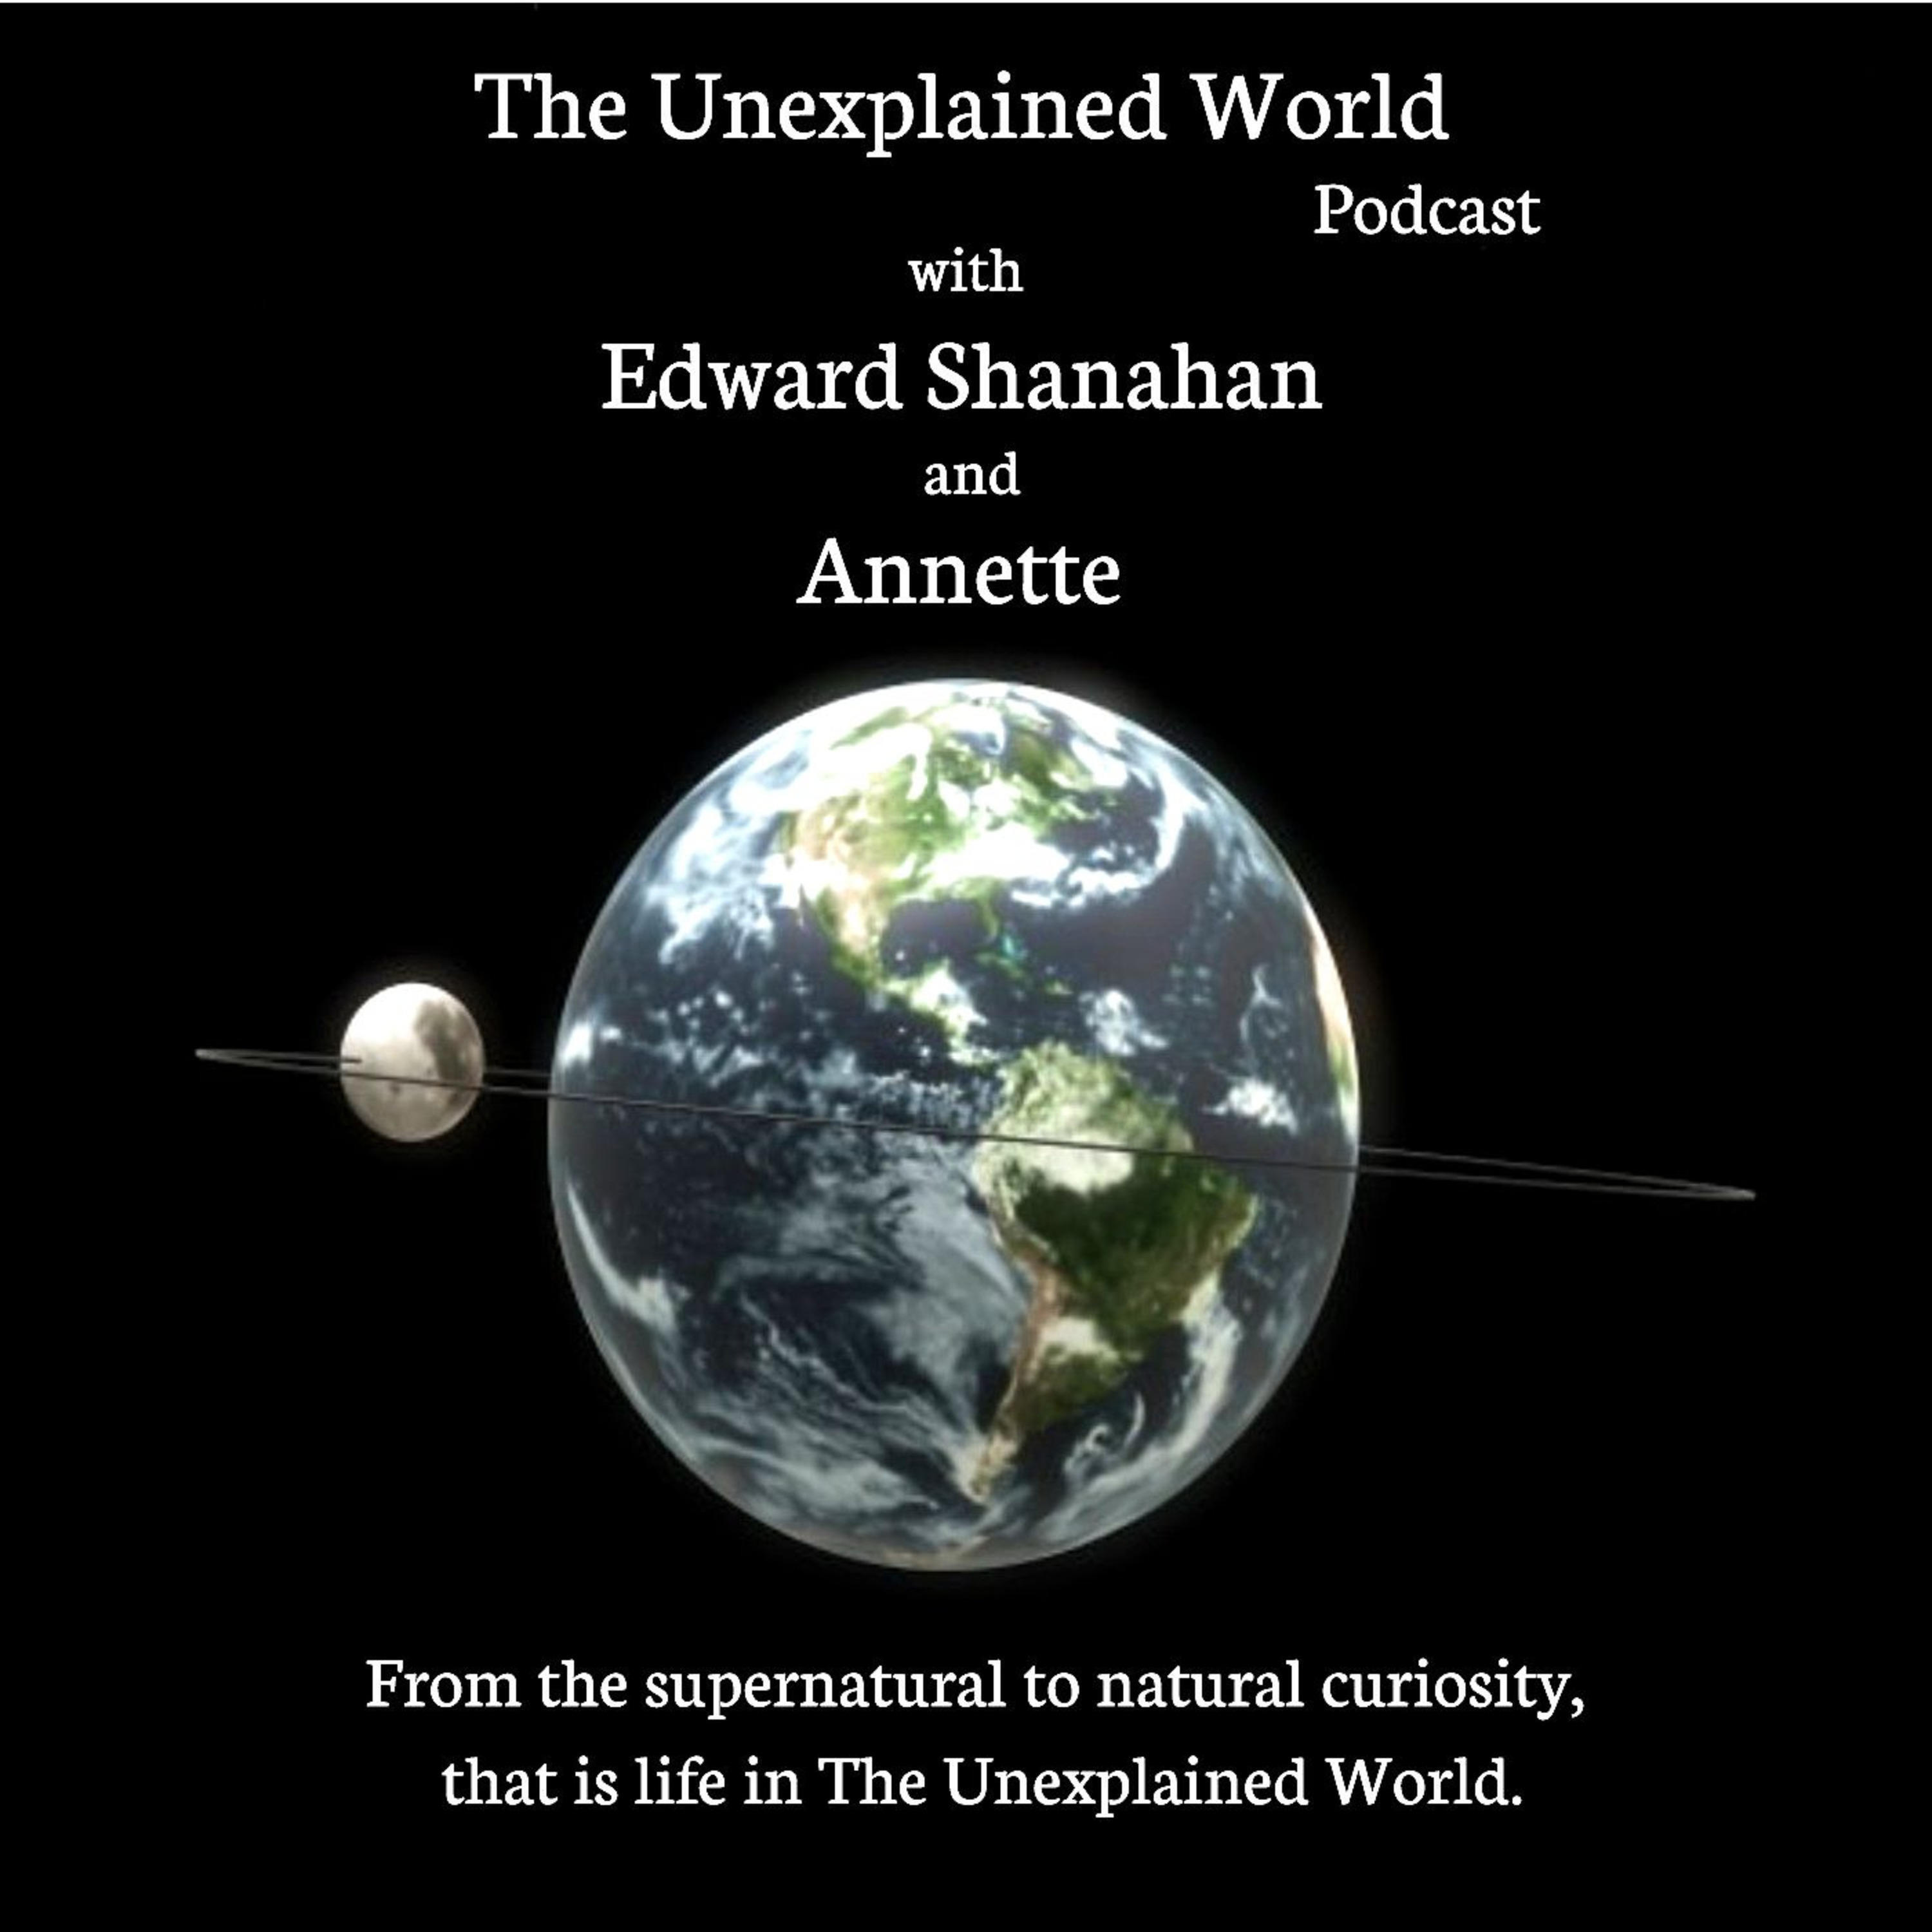 Listen to the The Unexplained World Episode - Interview Chicago Paranormal Investigator Dale Kaczmarek on location. Bachelor's Grove Cemetery, Monks Castle and more with Edward Shanahan on iHeartRadio | iHeartRadio